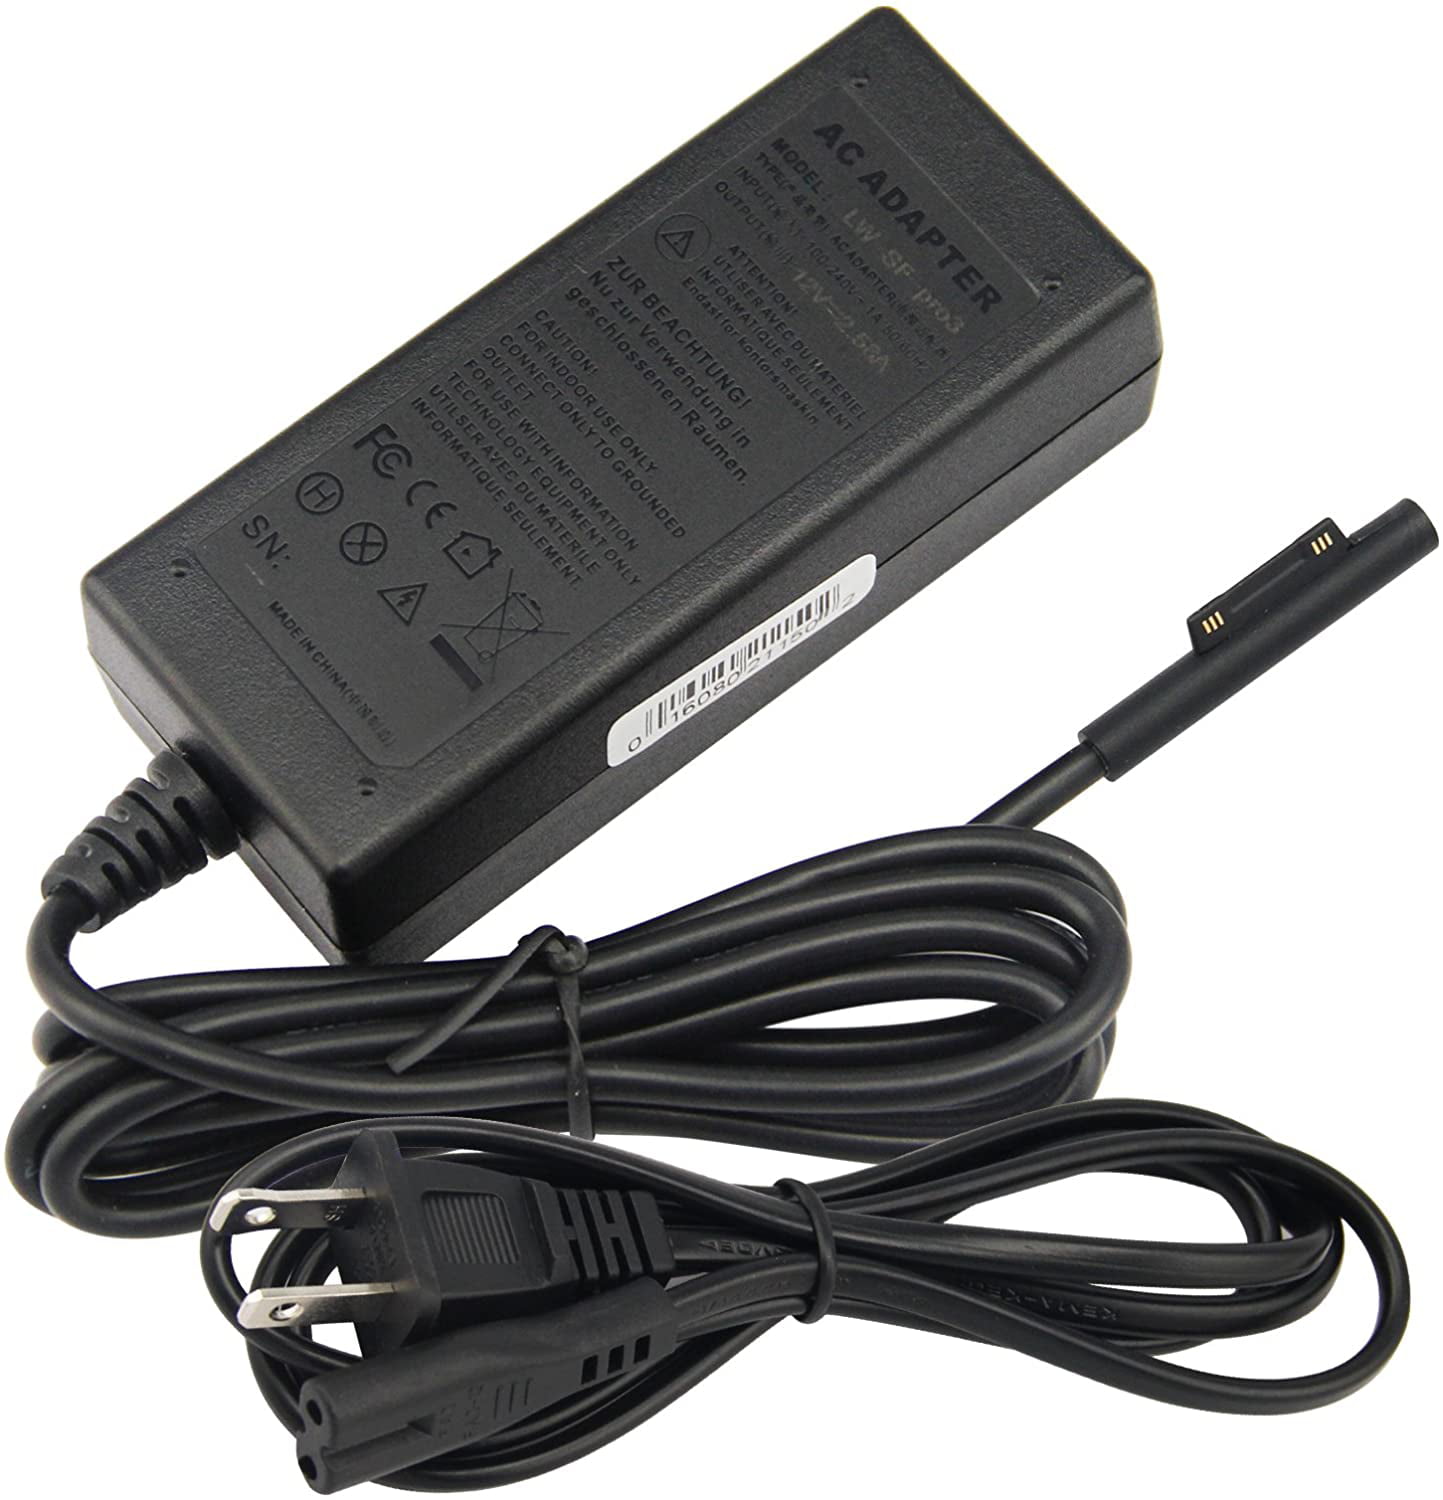 For Microsoft Surface Pro 4 3 Tablet Power Supply Adapter 12V 2.58A AC Charger 